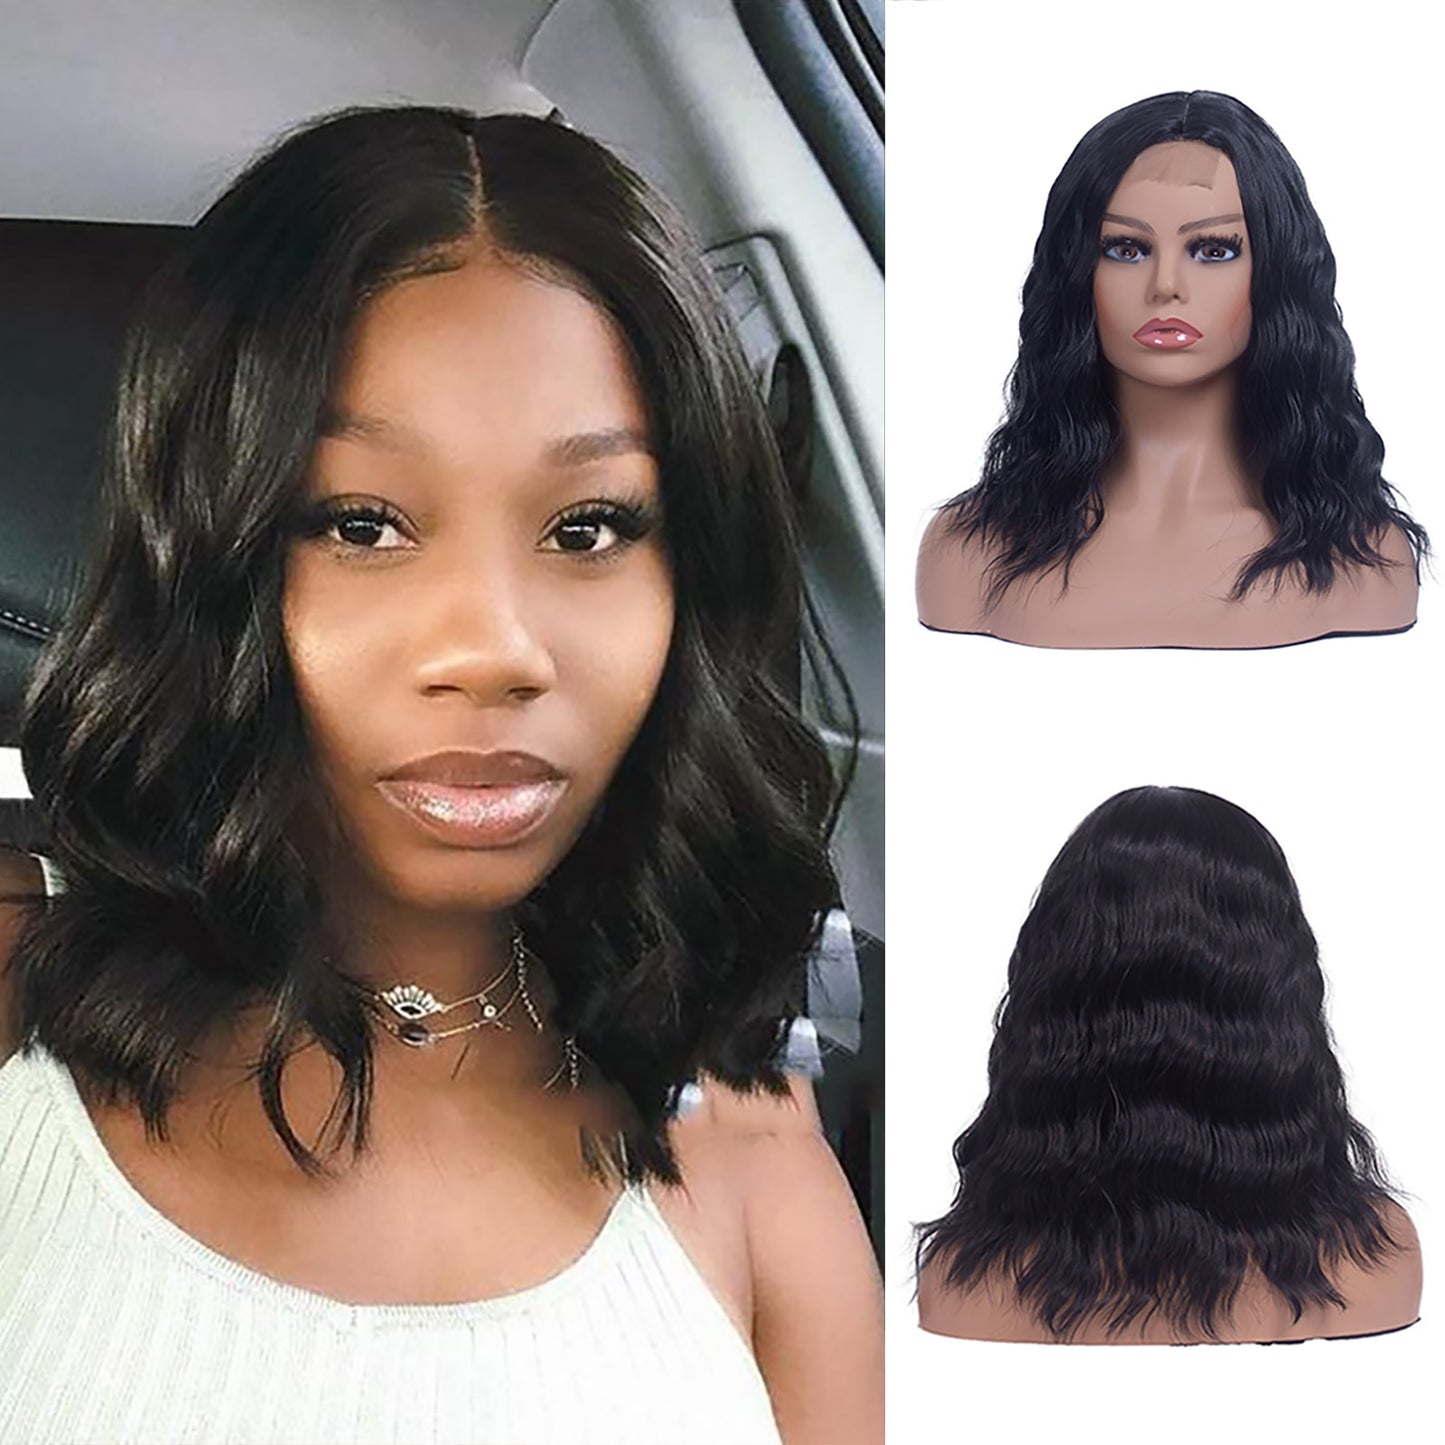 LINGDORA Black Middle Part Curly Short Wigs for Women